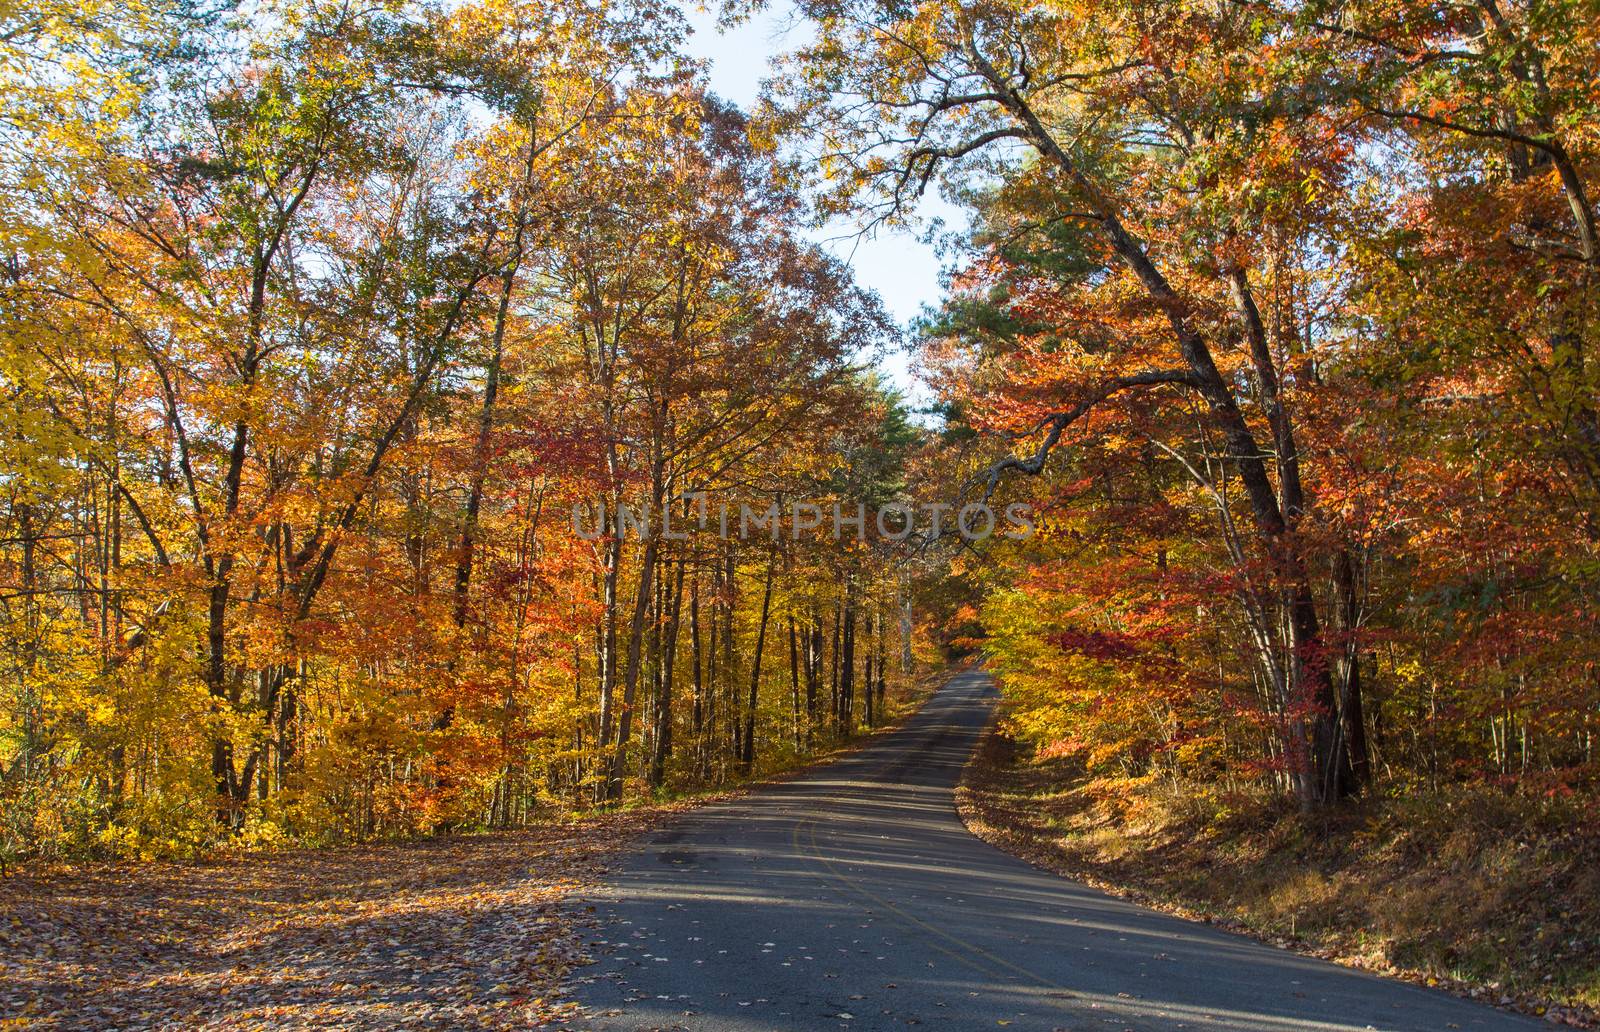 This image was taken on a late afternoon Fall day on the Little River Canyon Parkway, Alabama